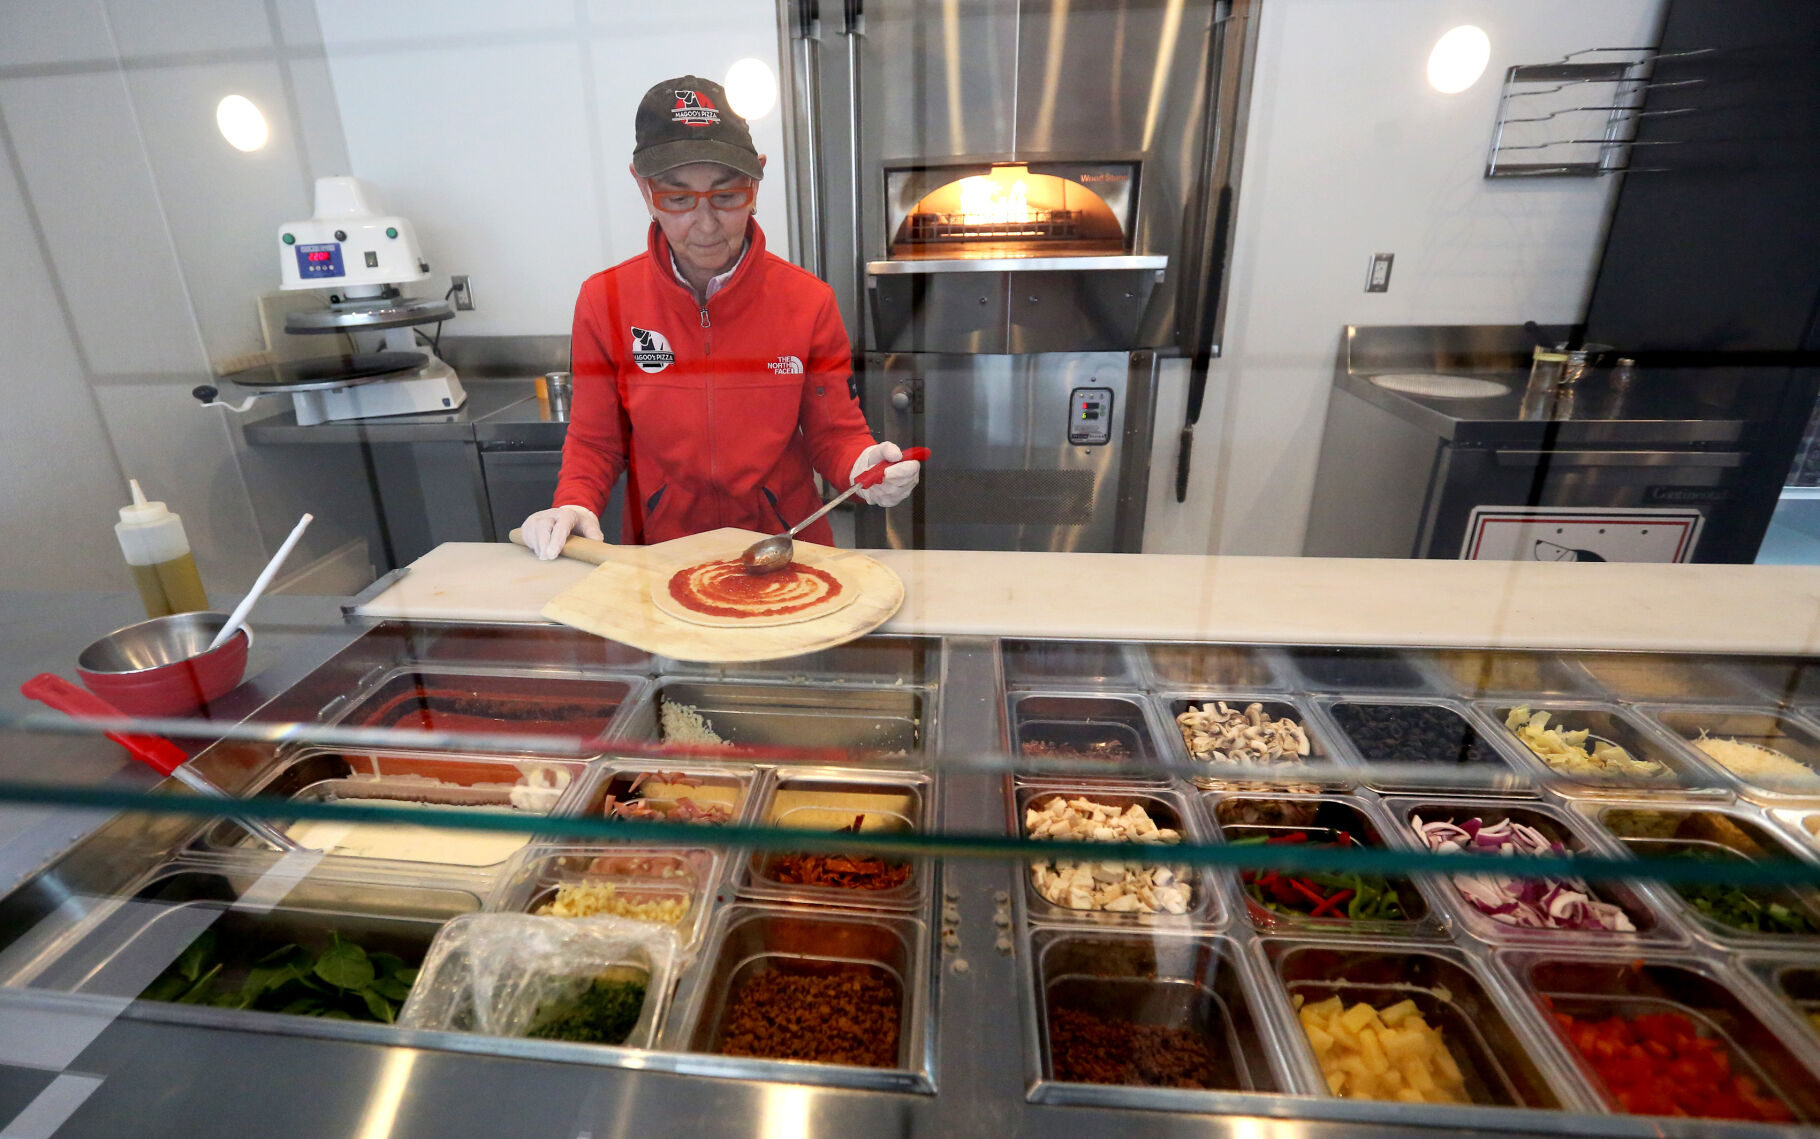 Susan Farber makes a pizza at Magoo’s Pizza in Dubuque on Friday, March 20, 2020.    PHOTO CREDIT: File photo